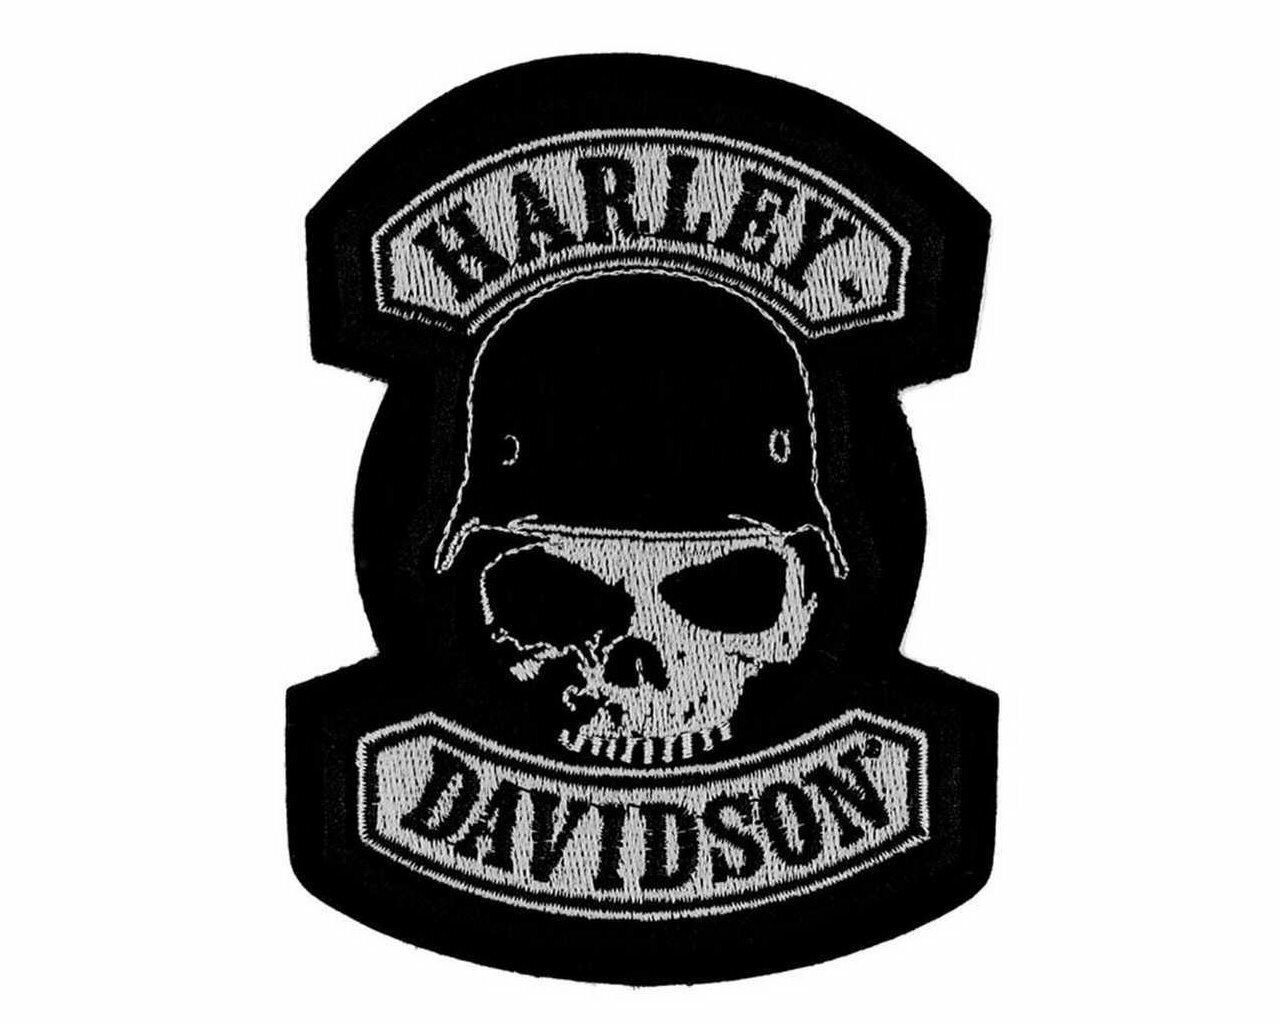 Harley Davidson® Spike Skull Embroidered Vest Patch Discontinued Made in the USA